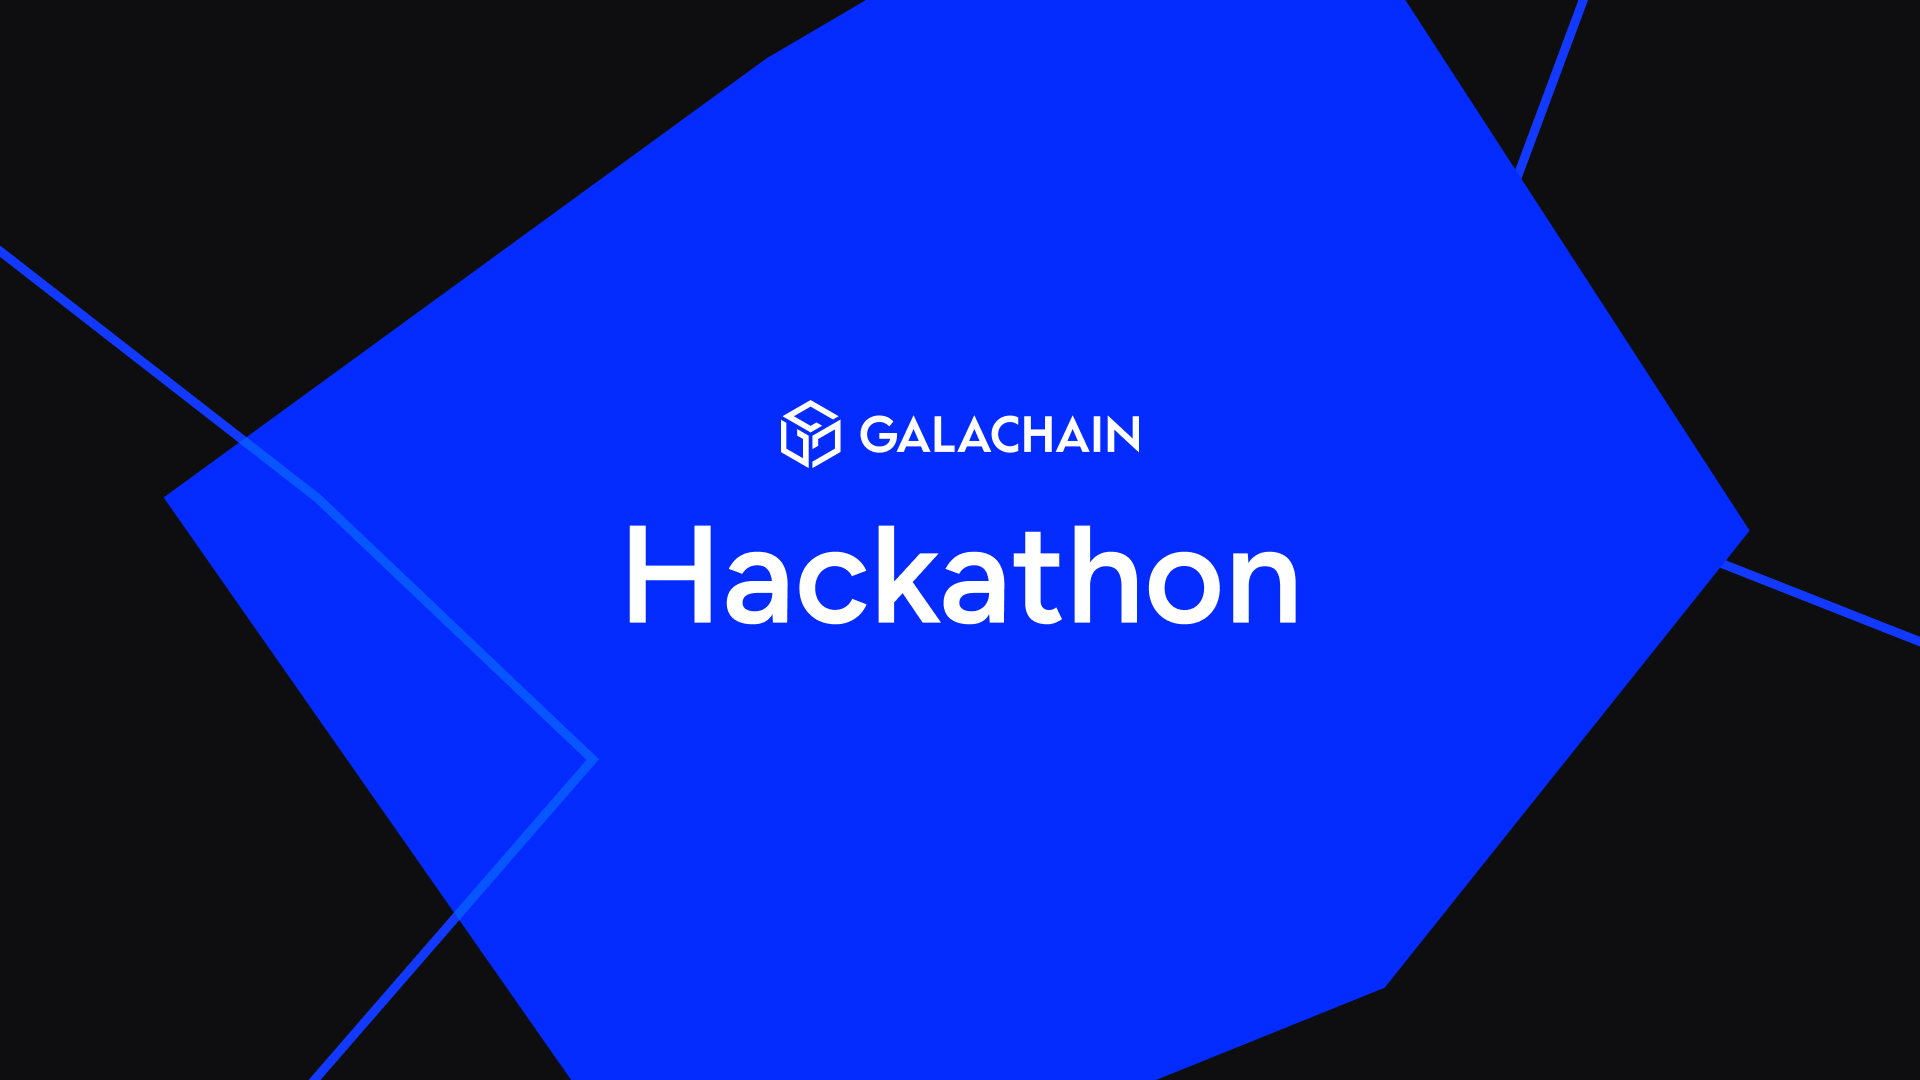 a 48 hour hackathon is coming to the GalaChain Discord community from 2/12-2/14!